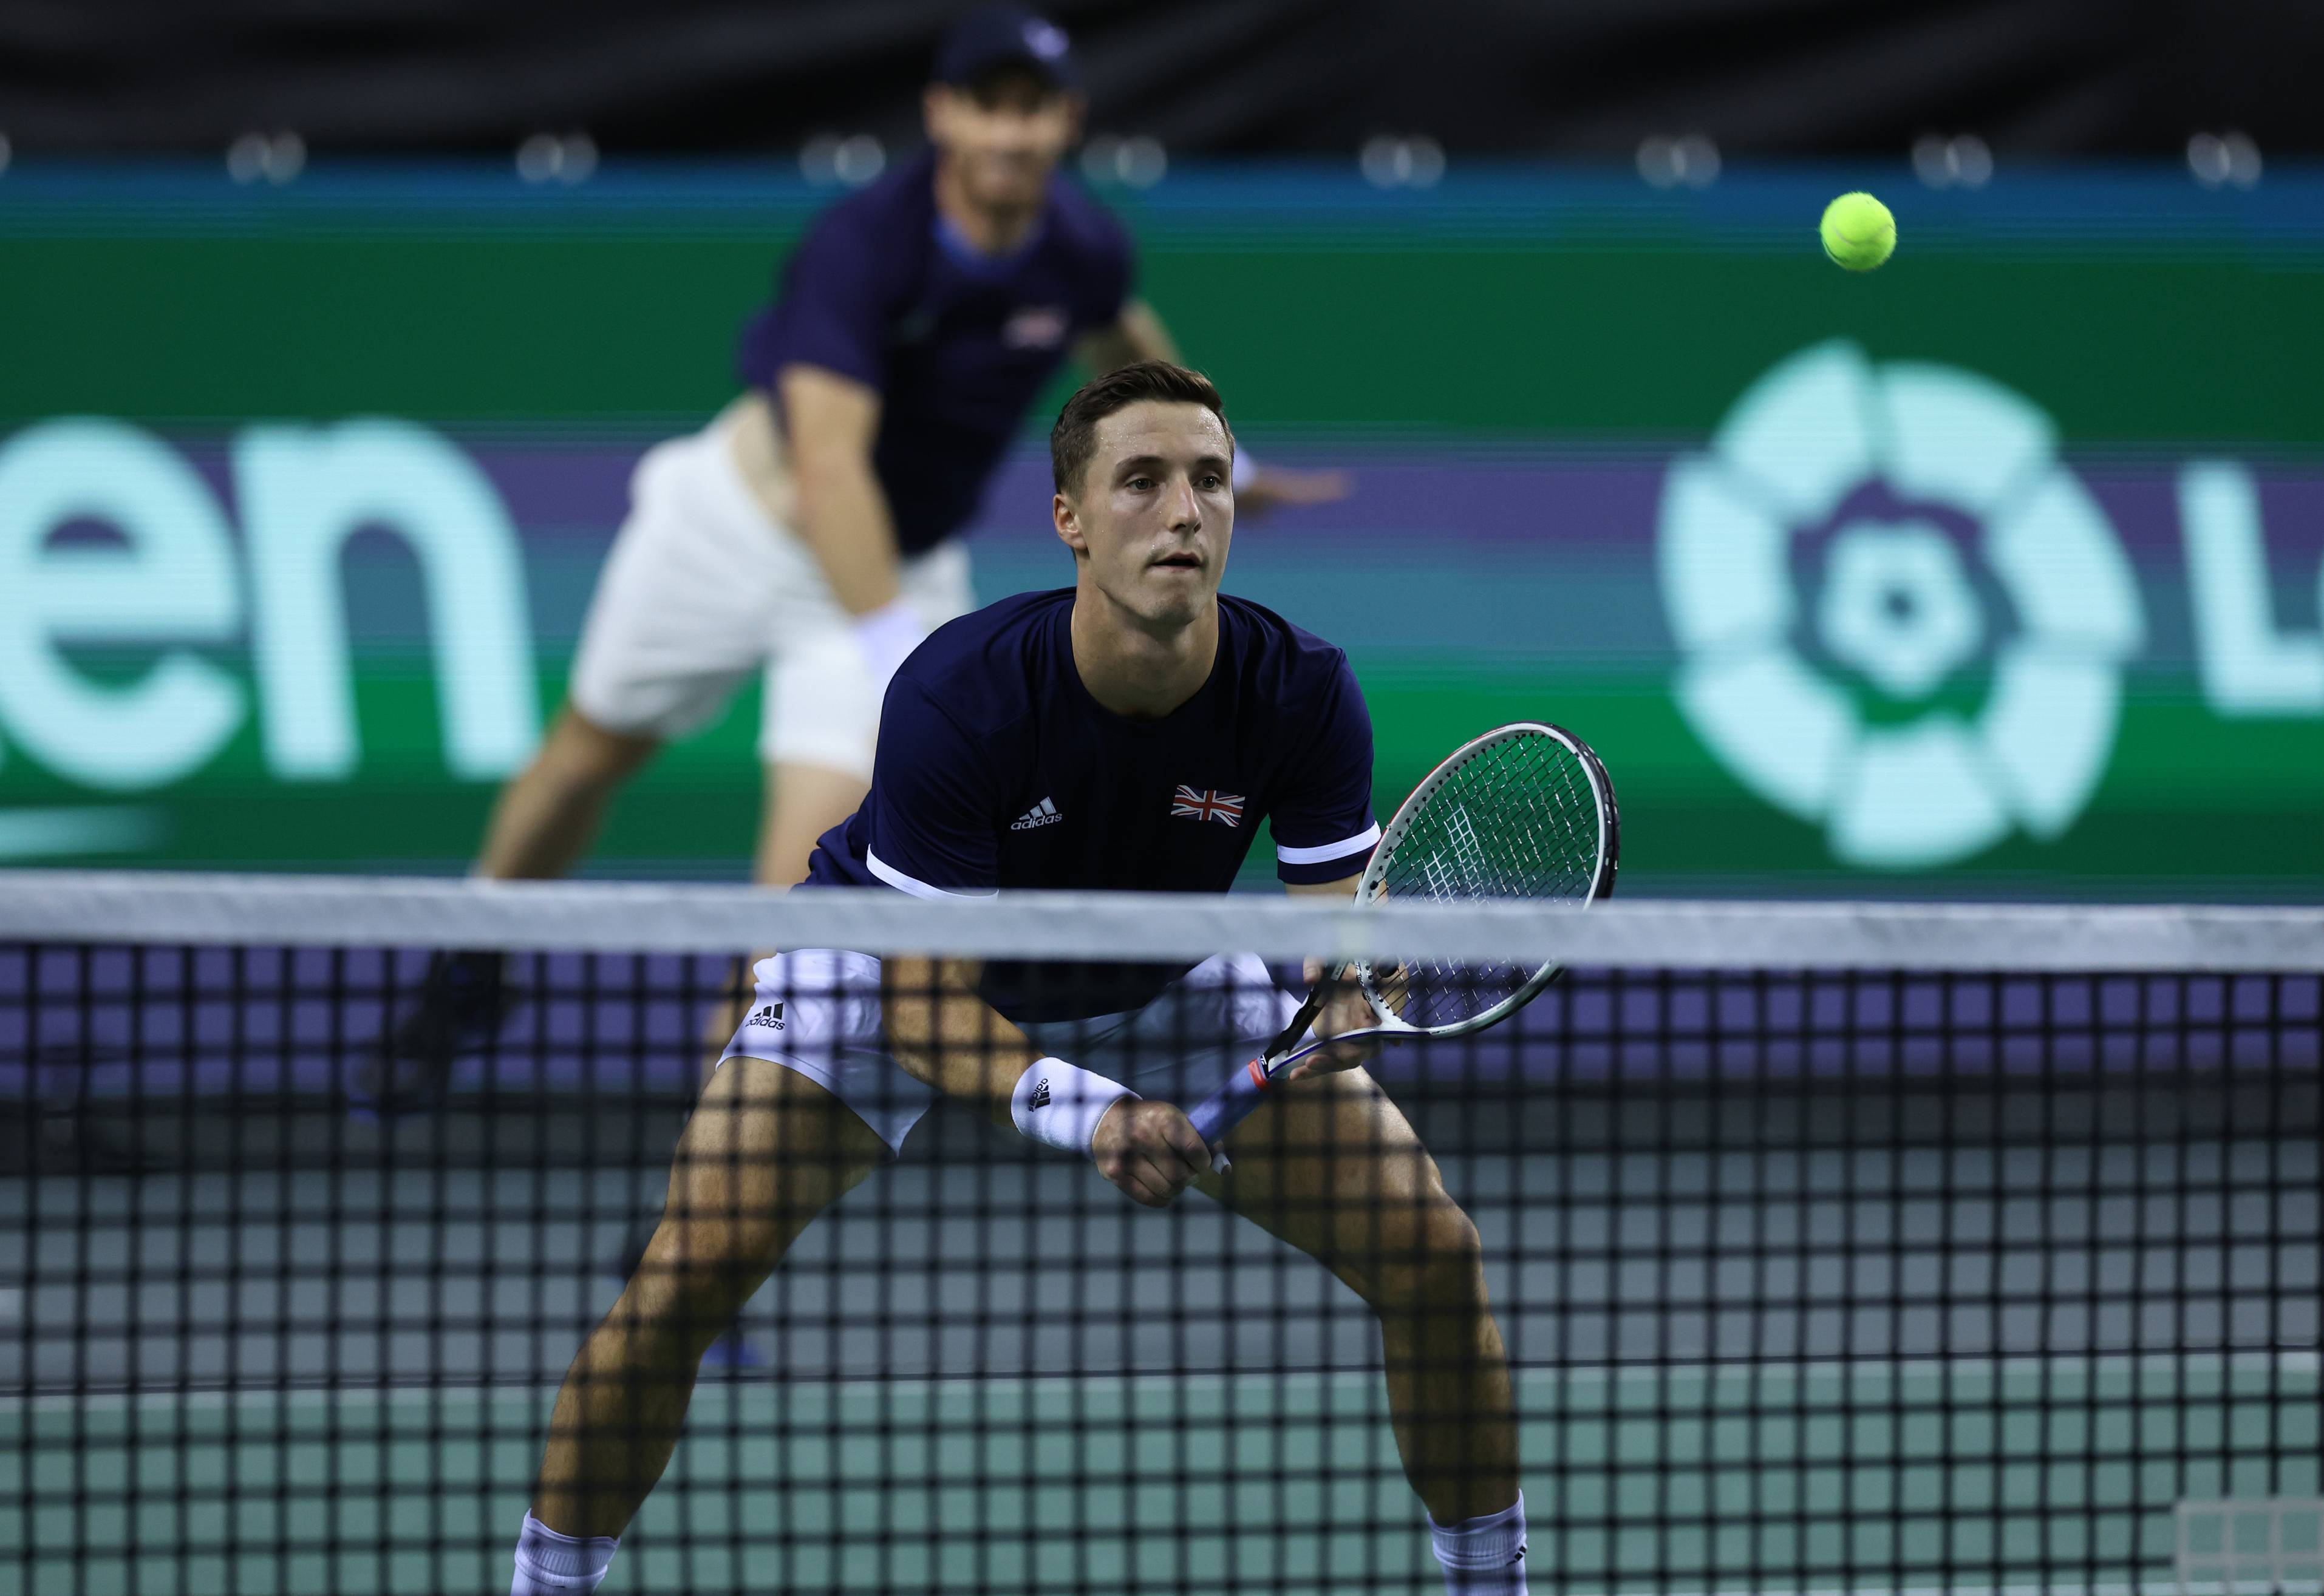 Davis Cup 2022 Great Britain knocked out in doubles decider against Netherlands LTA